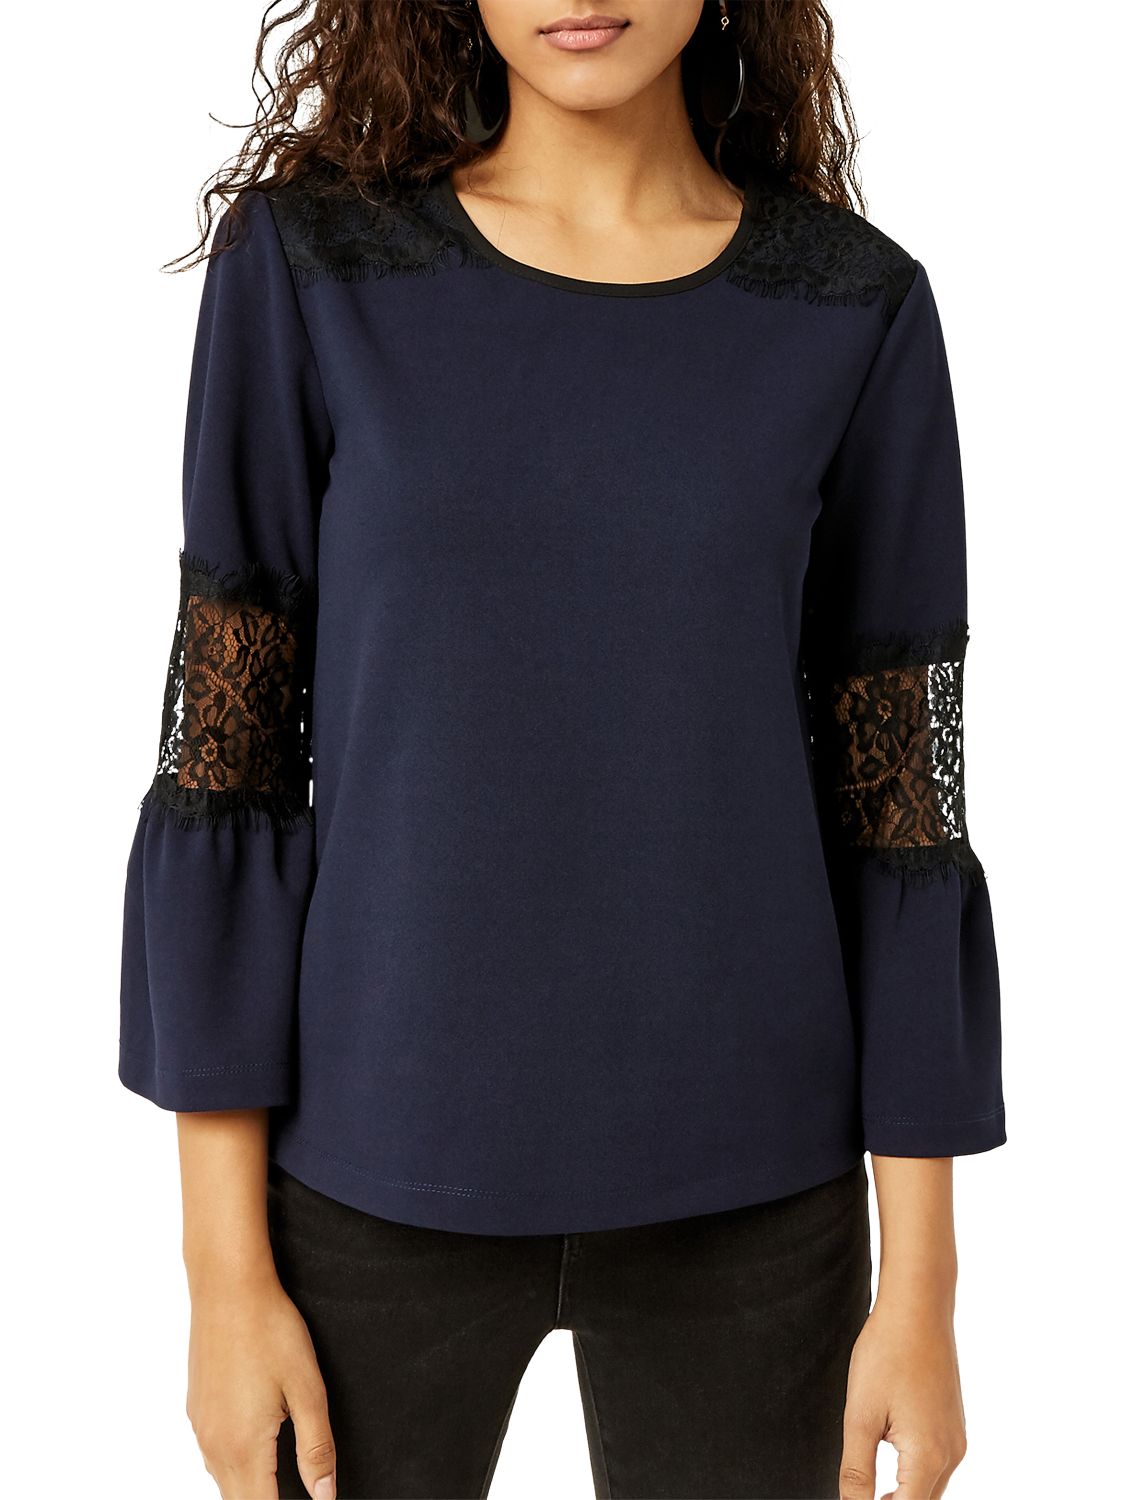 Warehouse Lace Insert Crepe Top, Navy